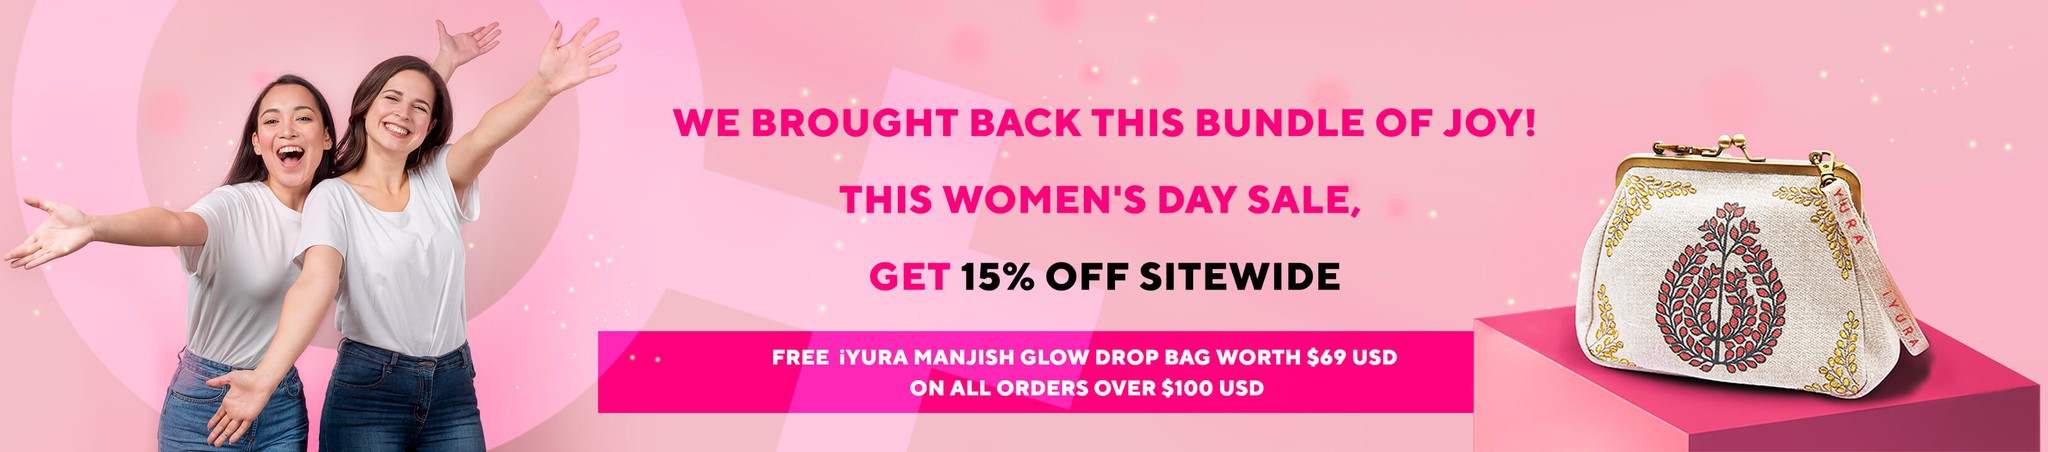 Lowest prices ever, Free iYURA Glow-Drop Bag on purchases above $100 USD